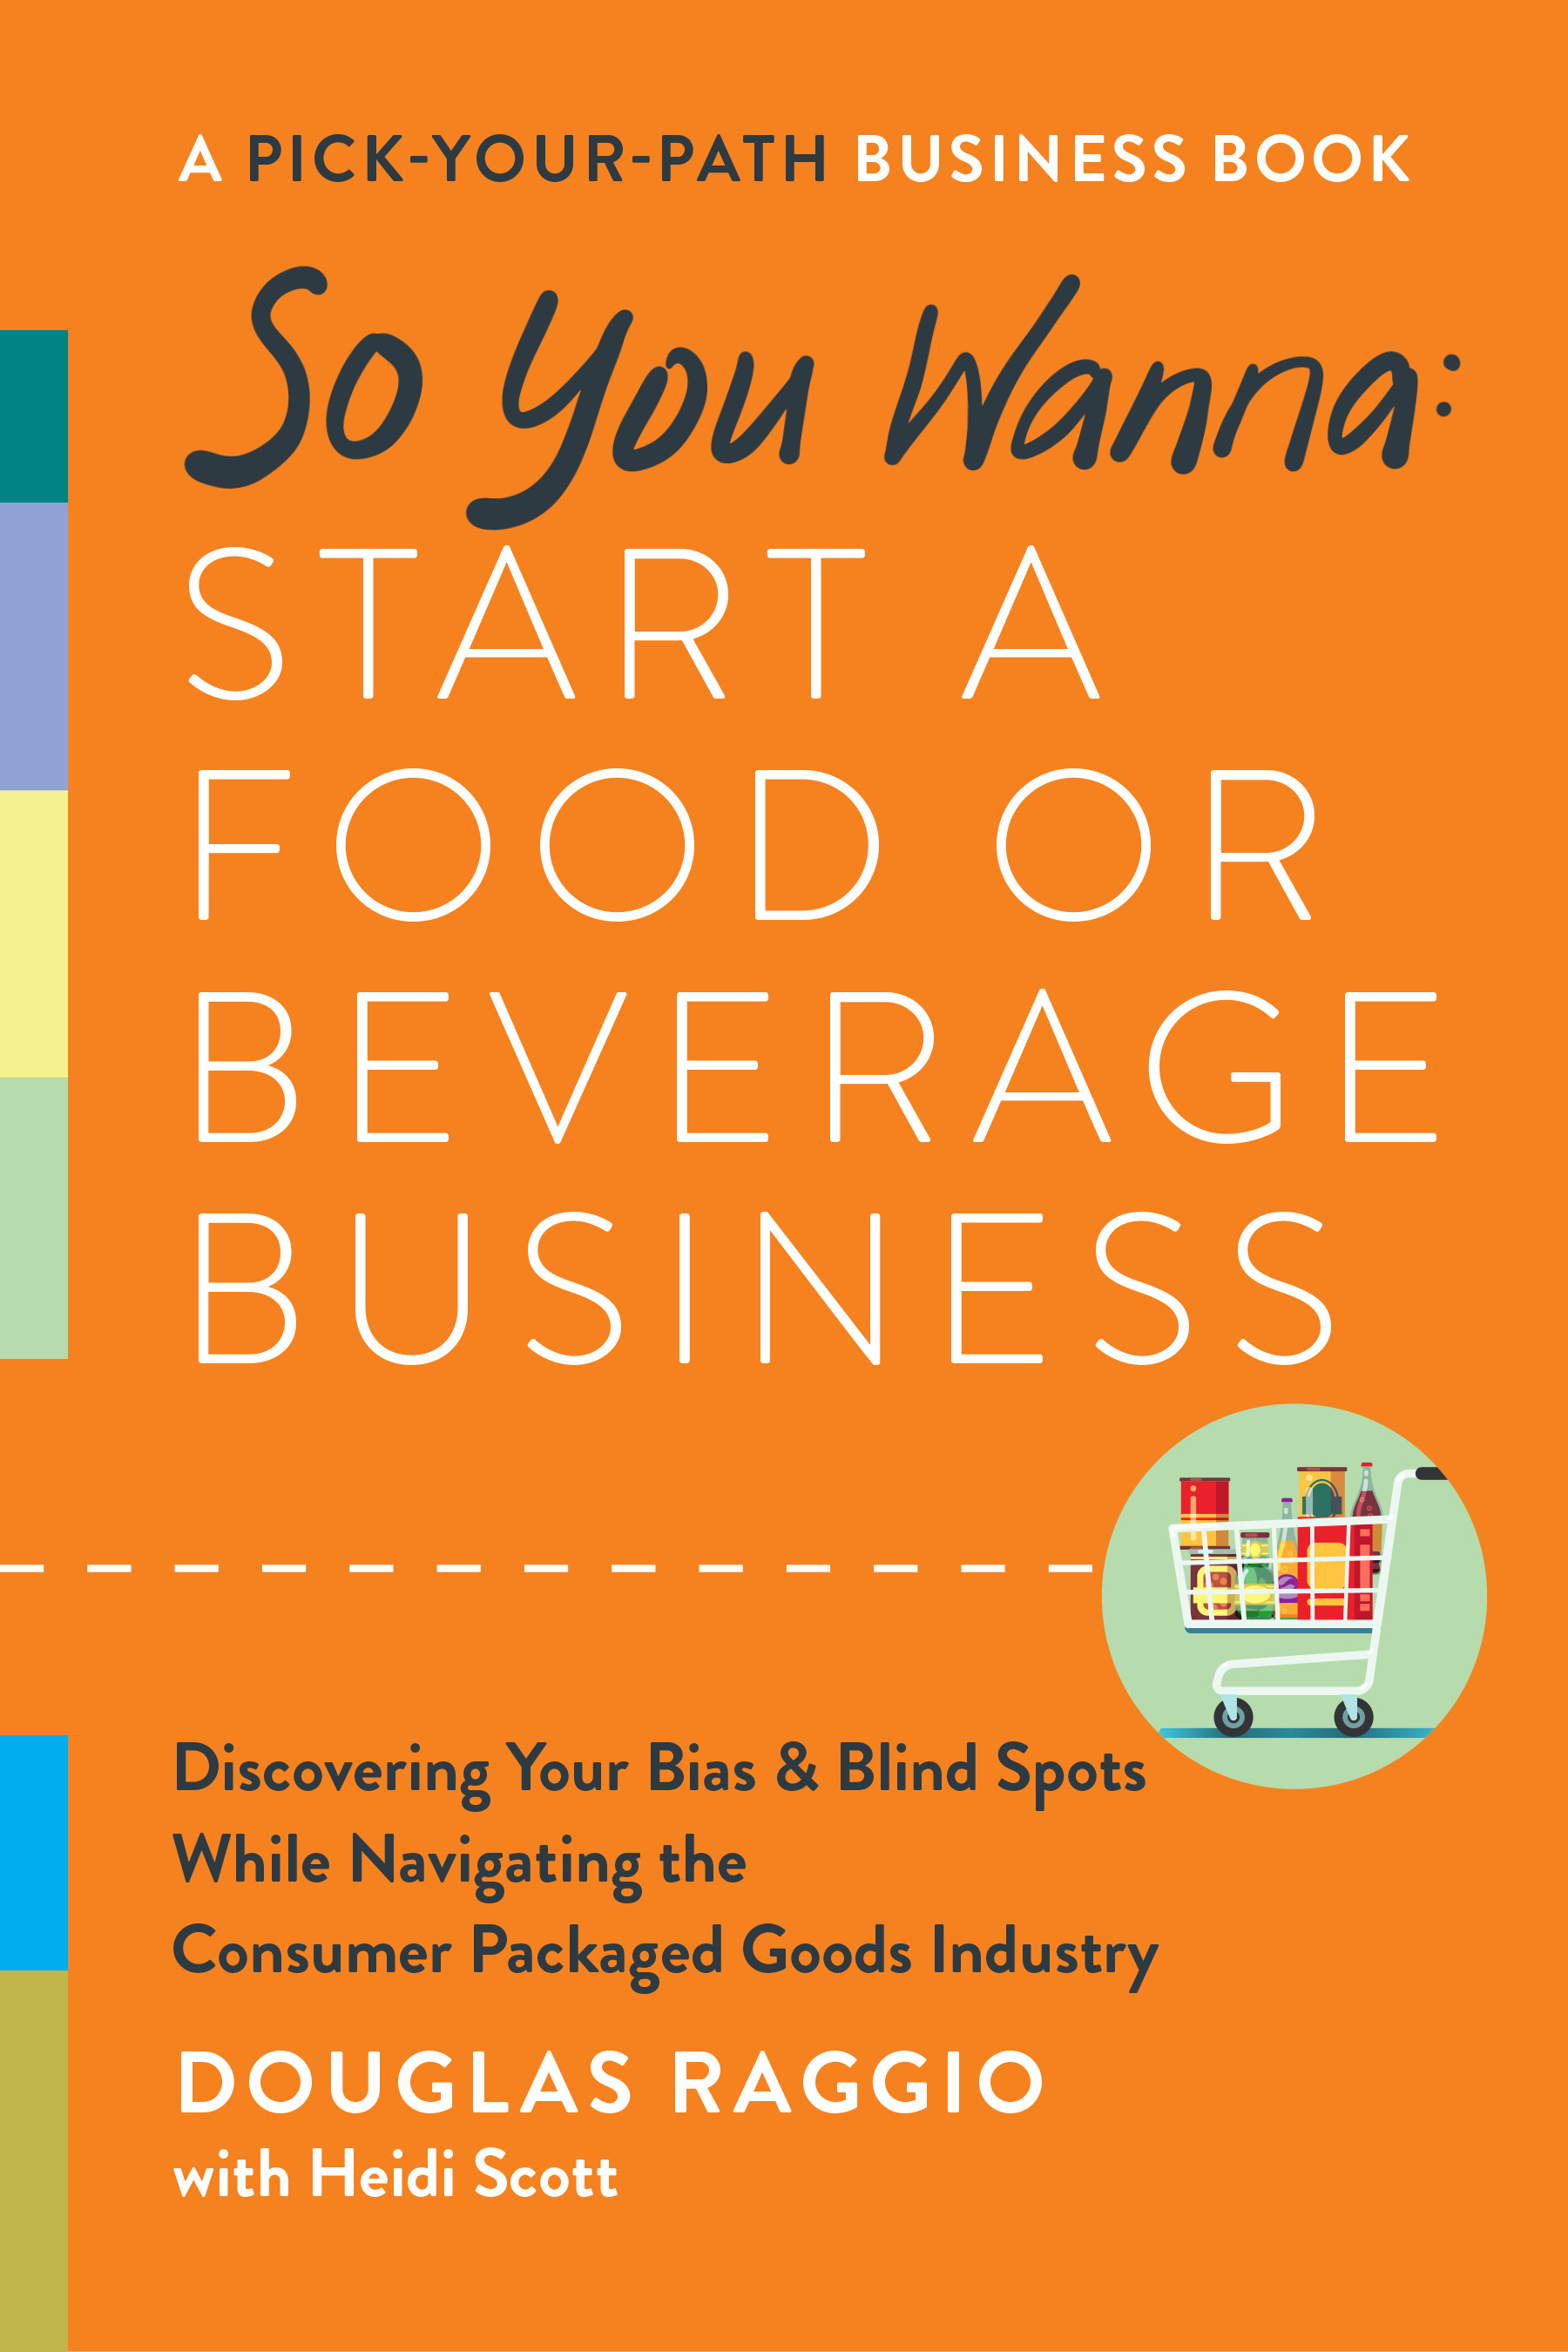 So You Wanna: Start a Food or Beverage Business : A Pick-Your-Path Business Book | Raggio, Douglas